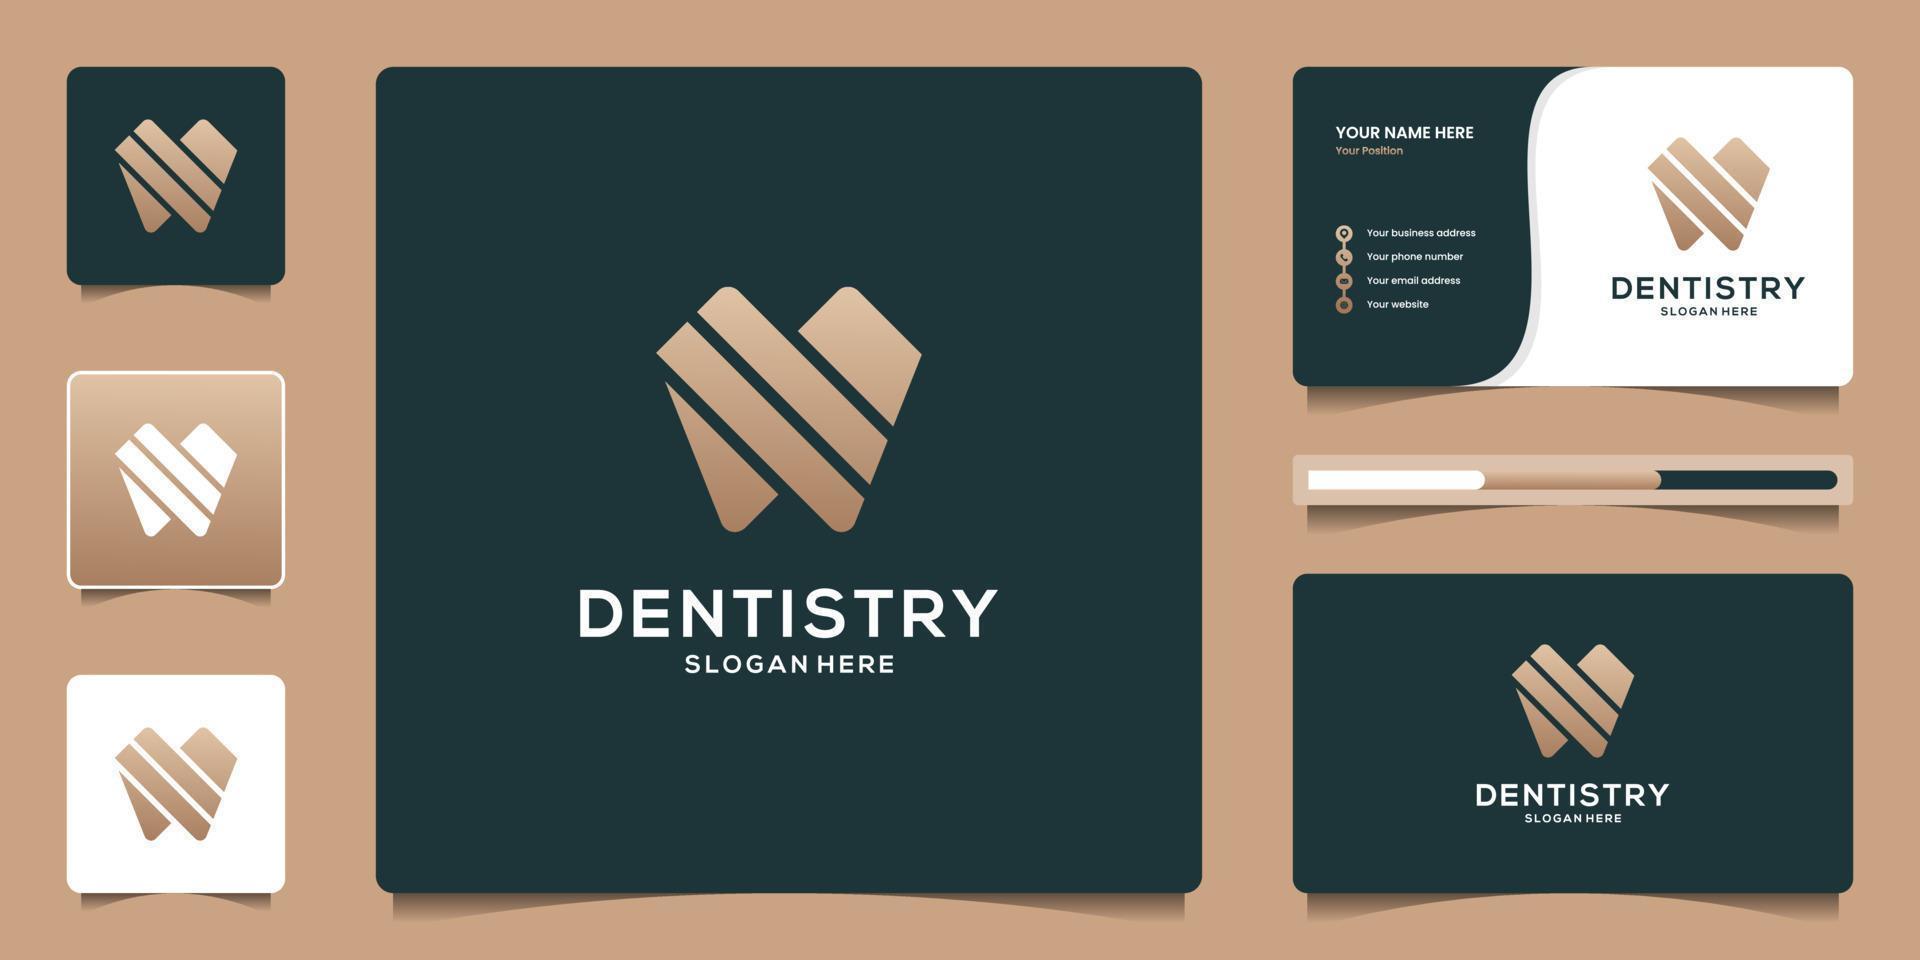 Creative dentistry clinic logo design and business card template vector